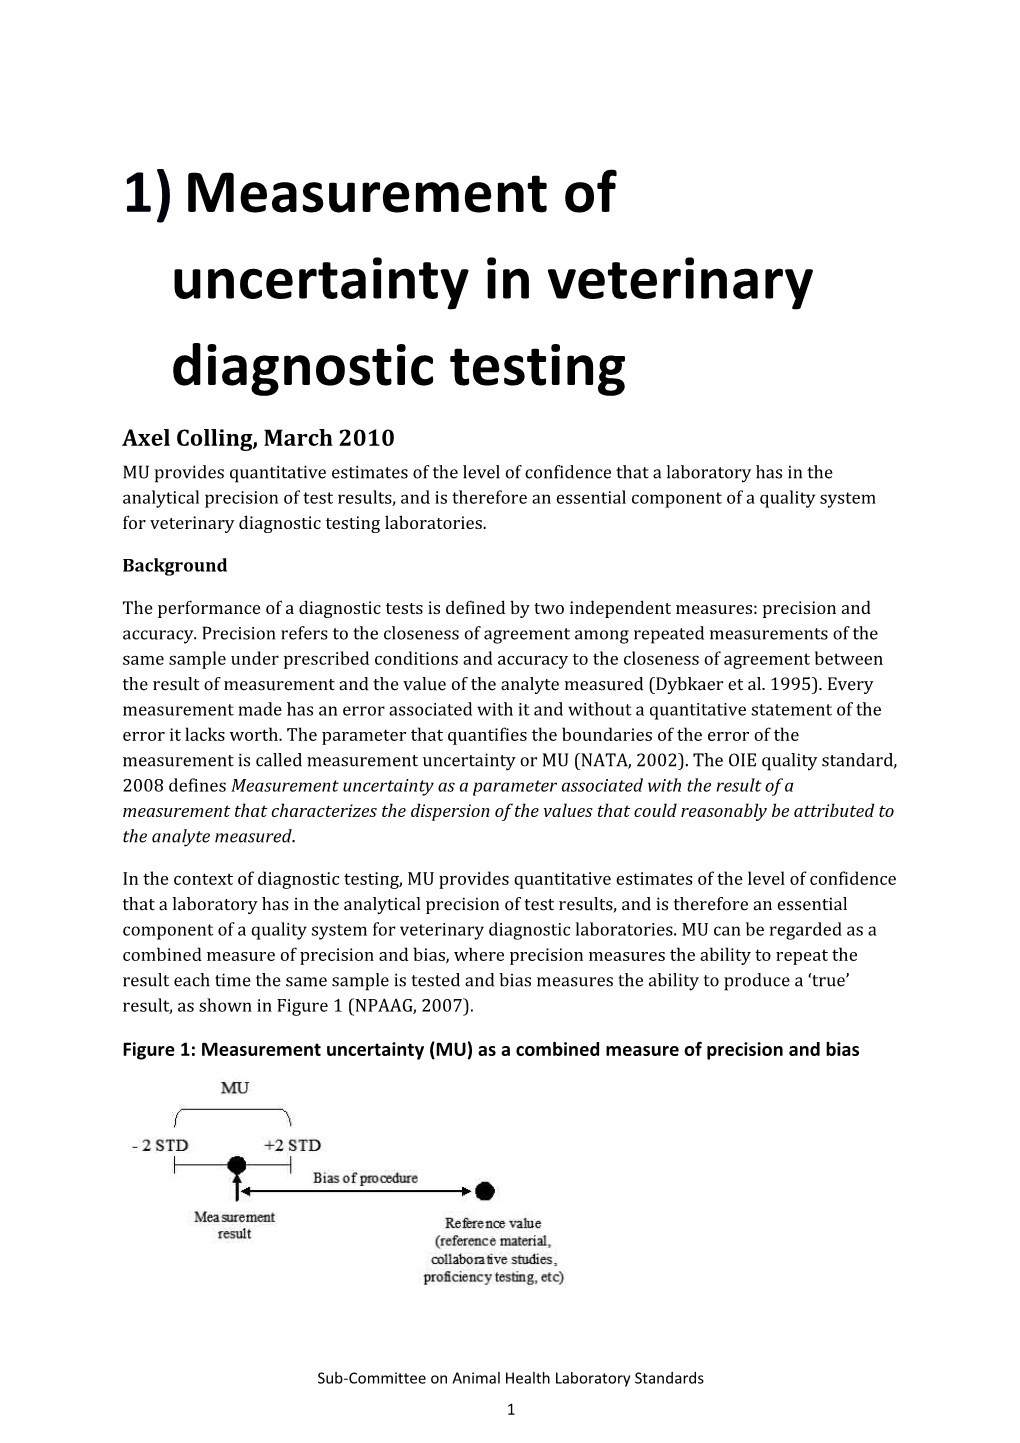 Measurement of Uncertainty in Veterinary Diagnostic Testing